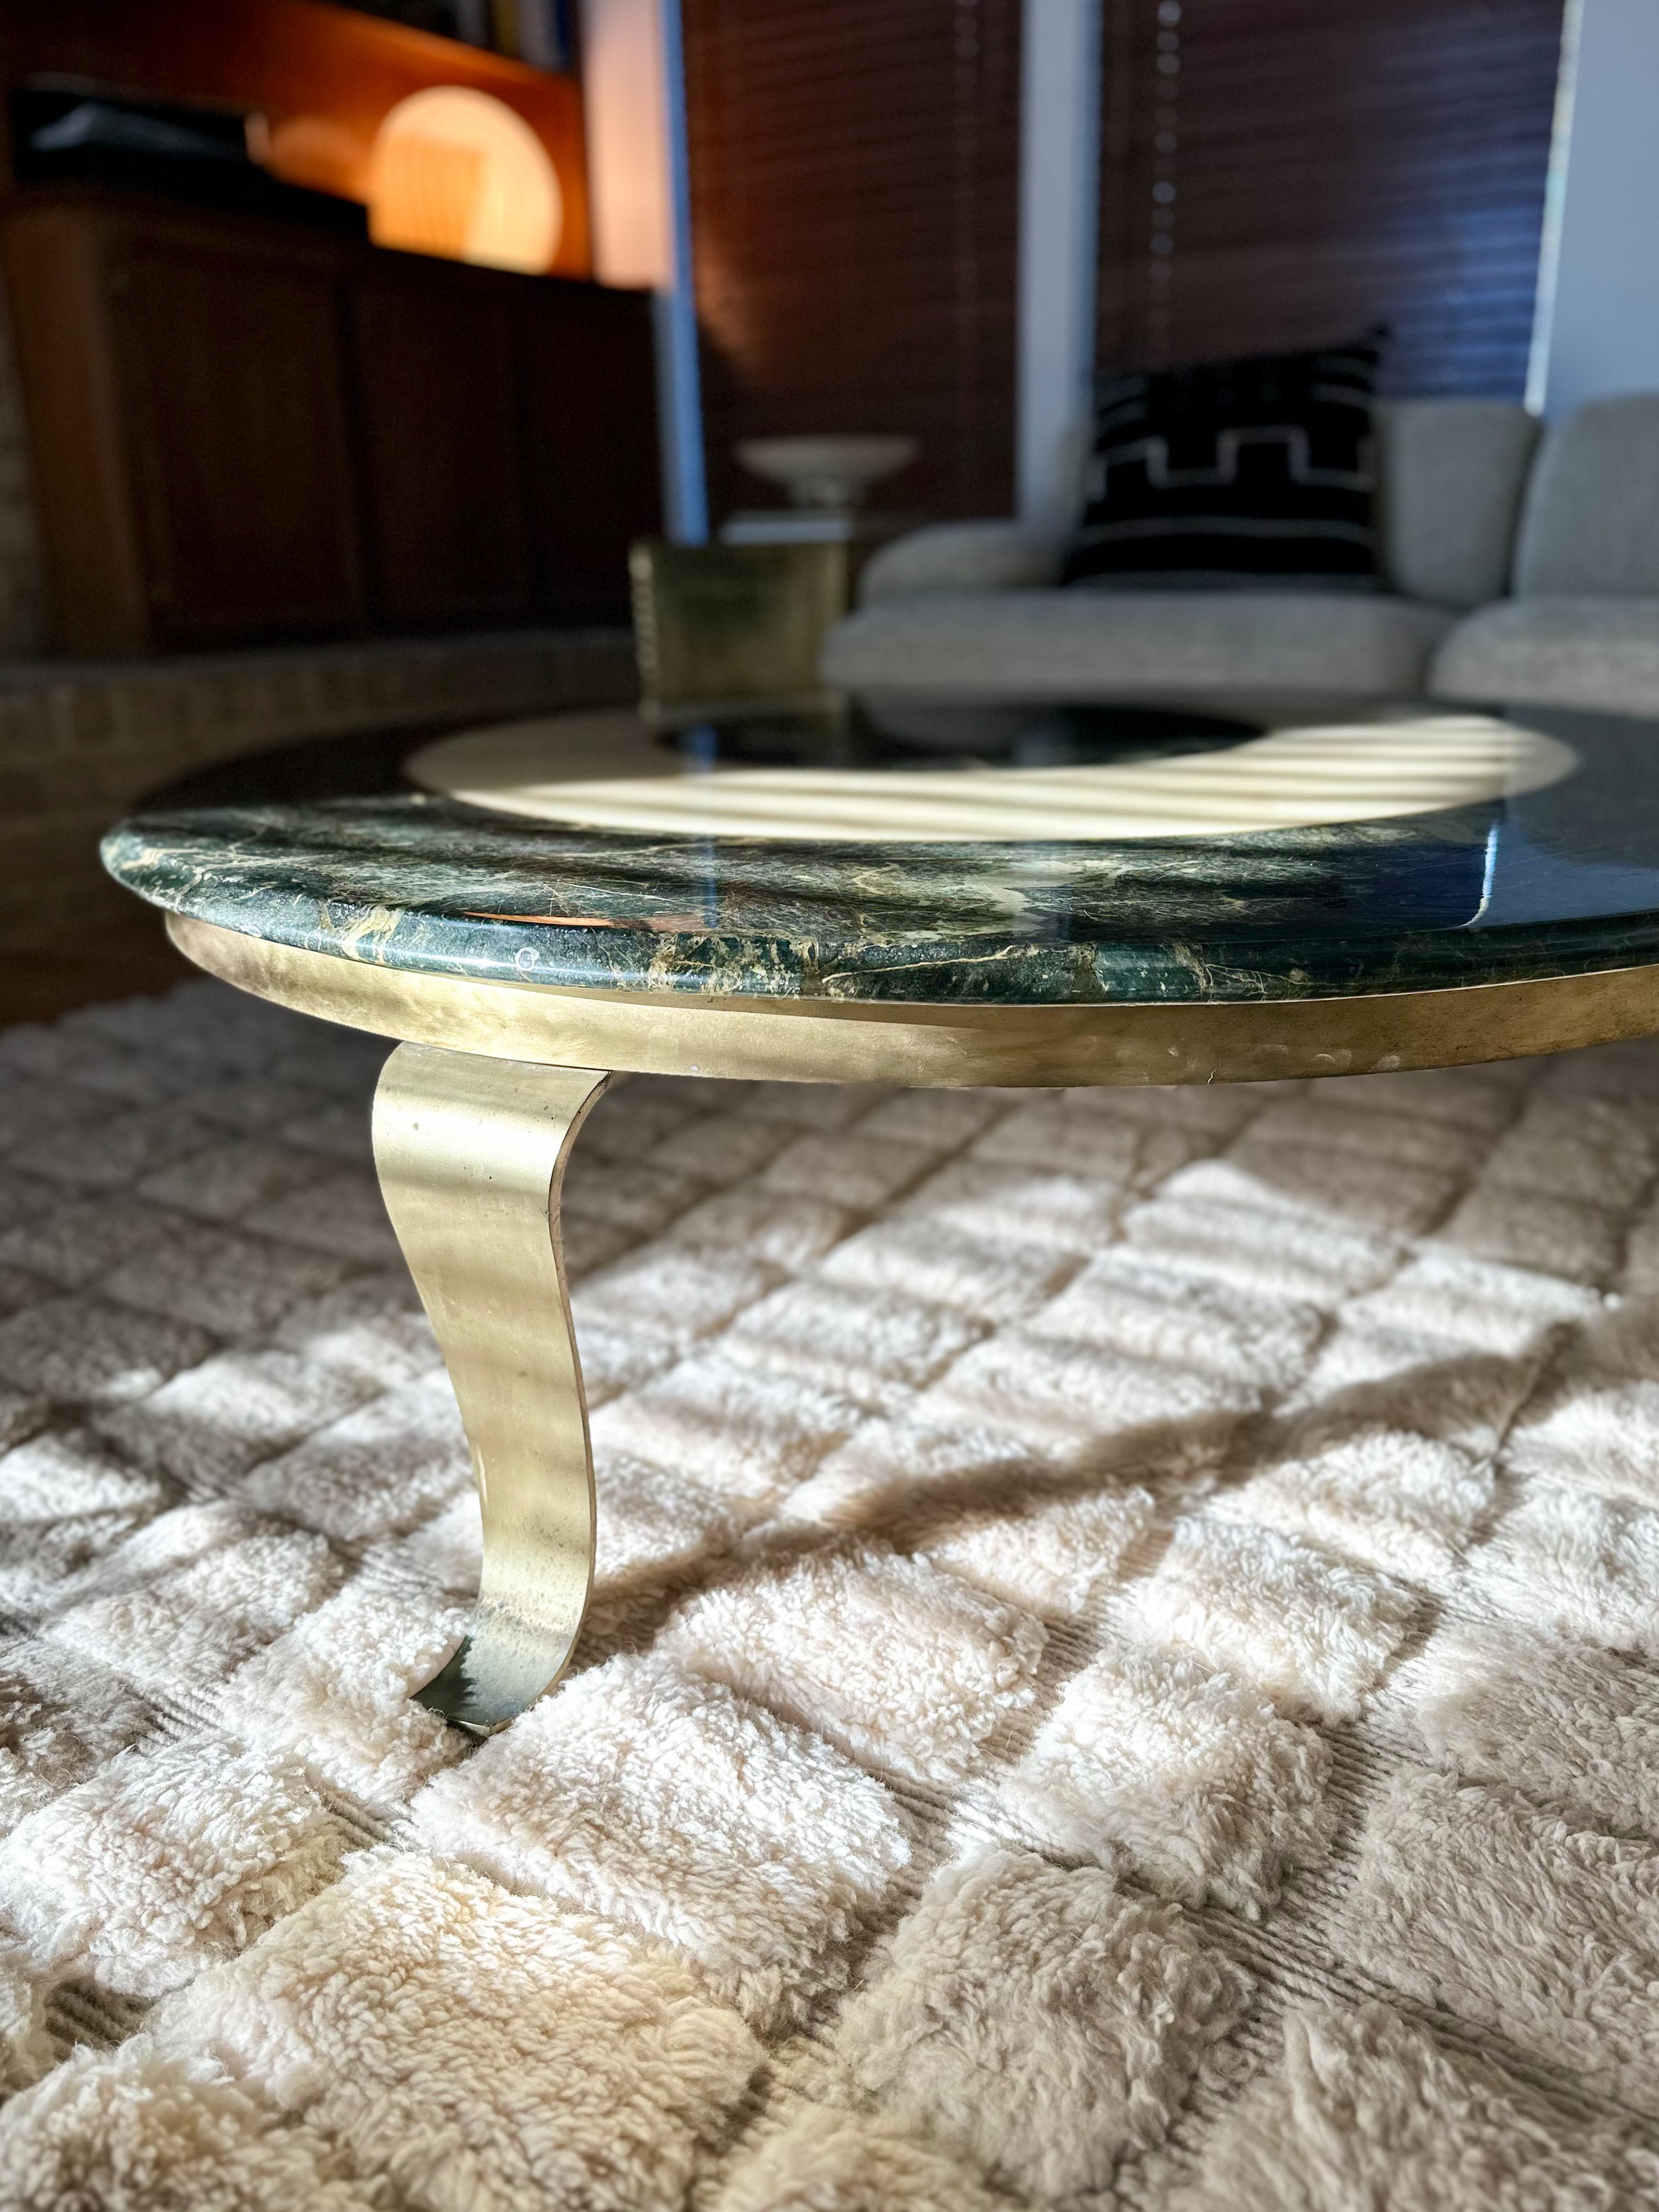 1960s Green and Cream Onyx Coffee Table by Arturo Pani for Muller of Mexico In Good Condition For Sale In Houston, TX